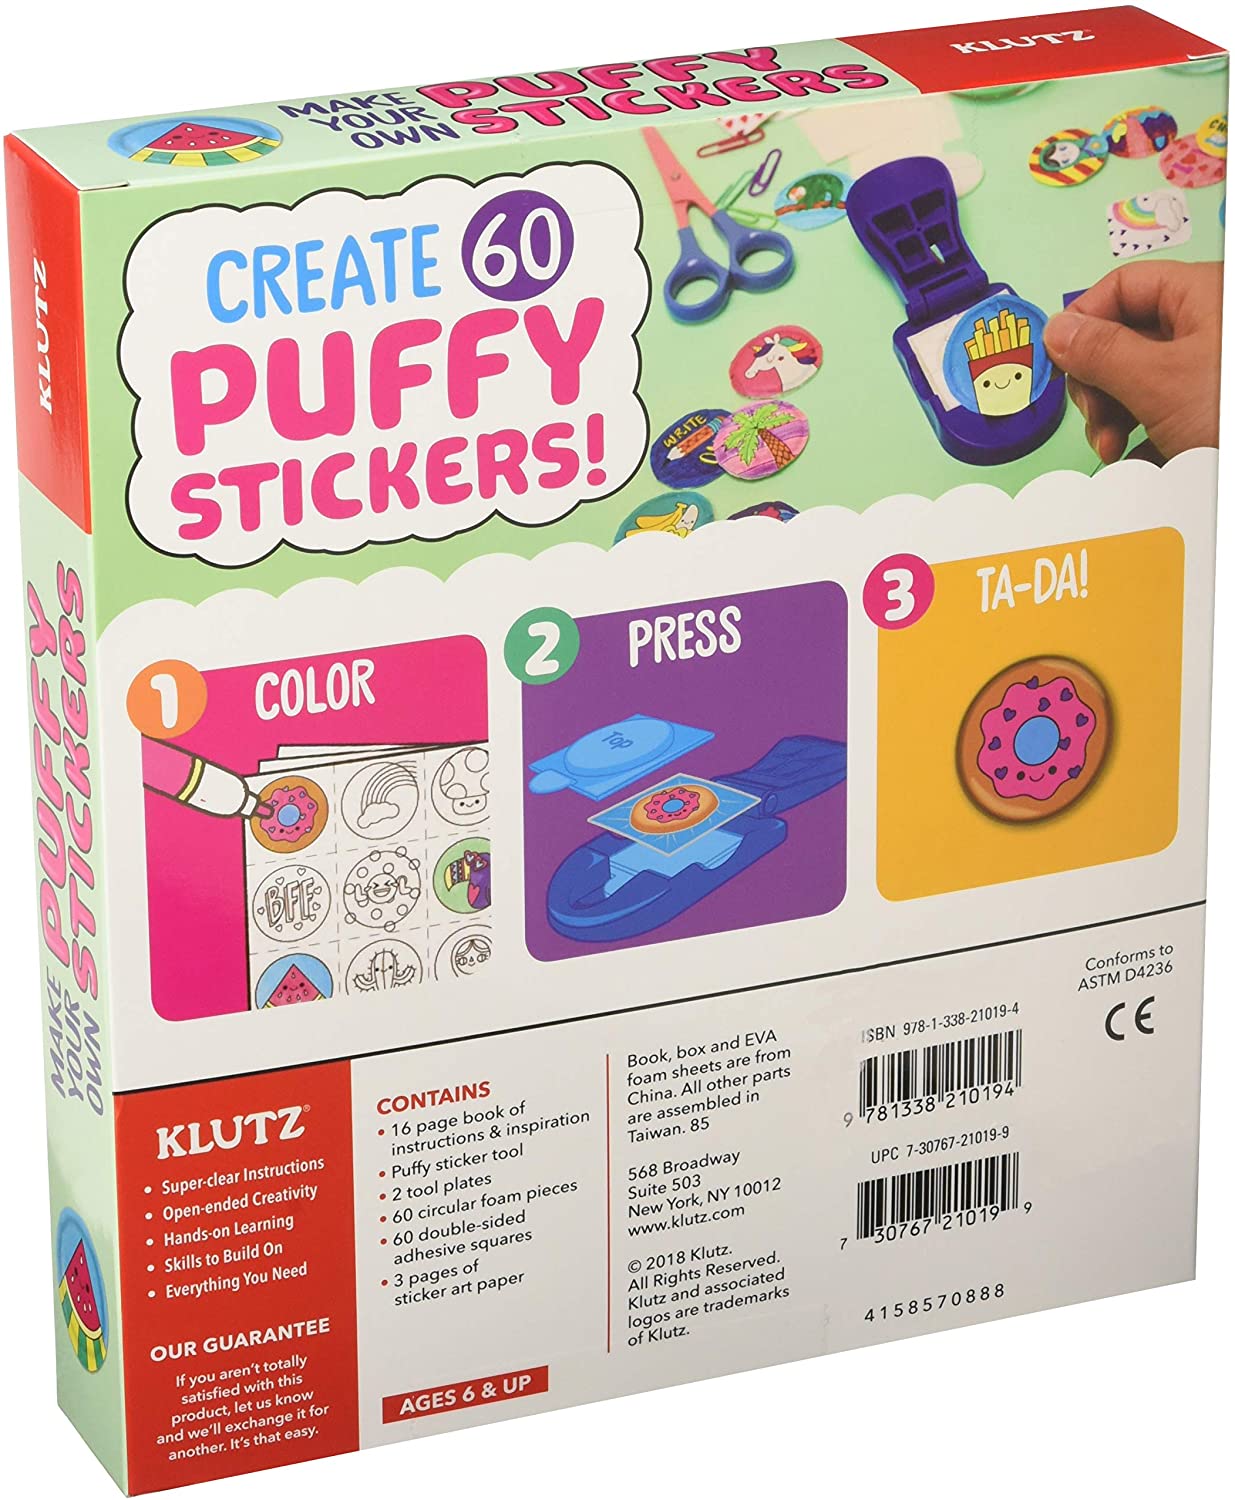 Make Your Own Puffy Stickers by Klutz